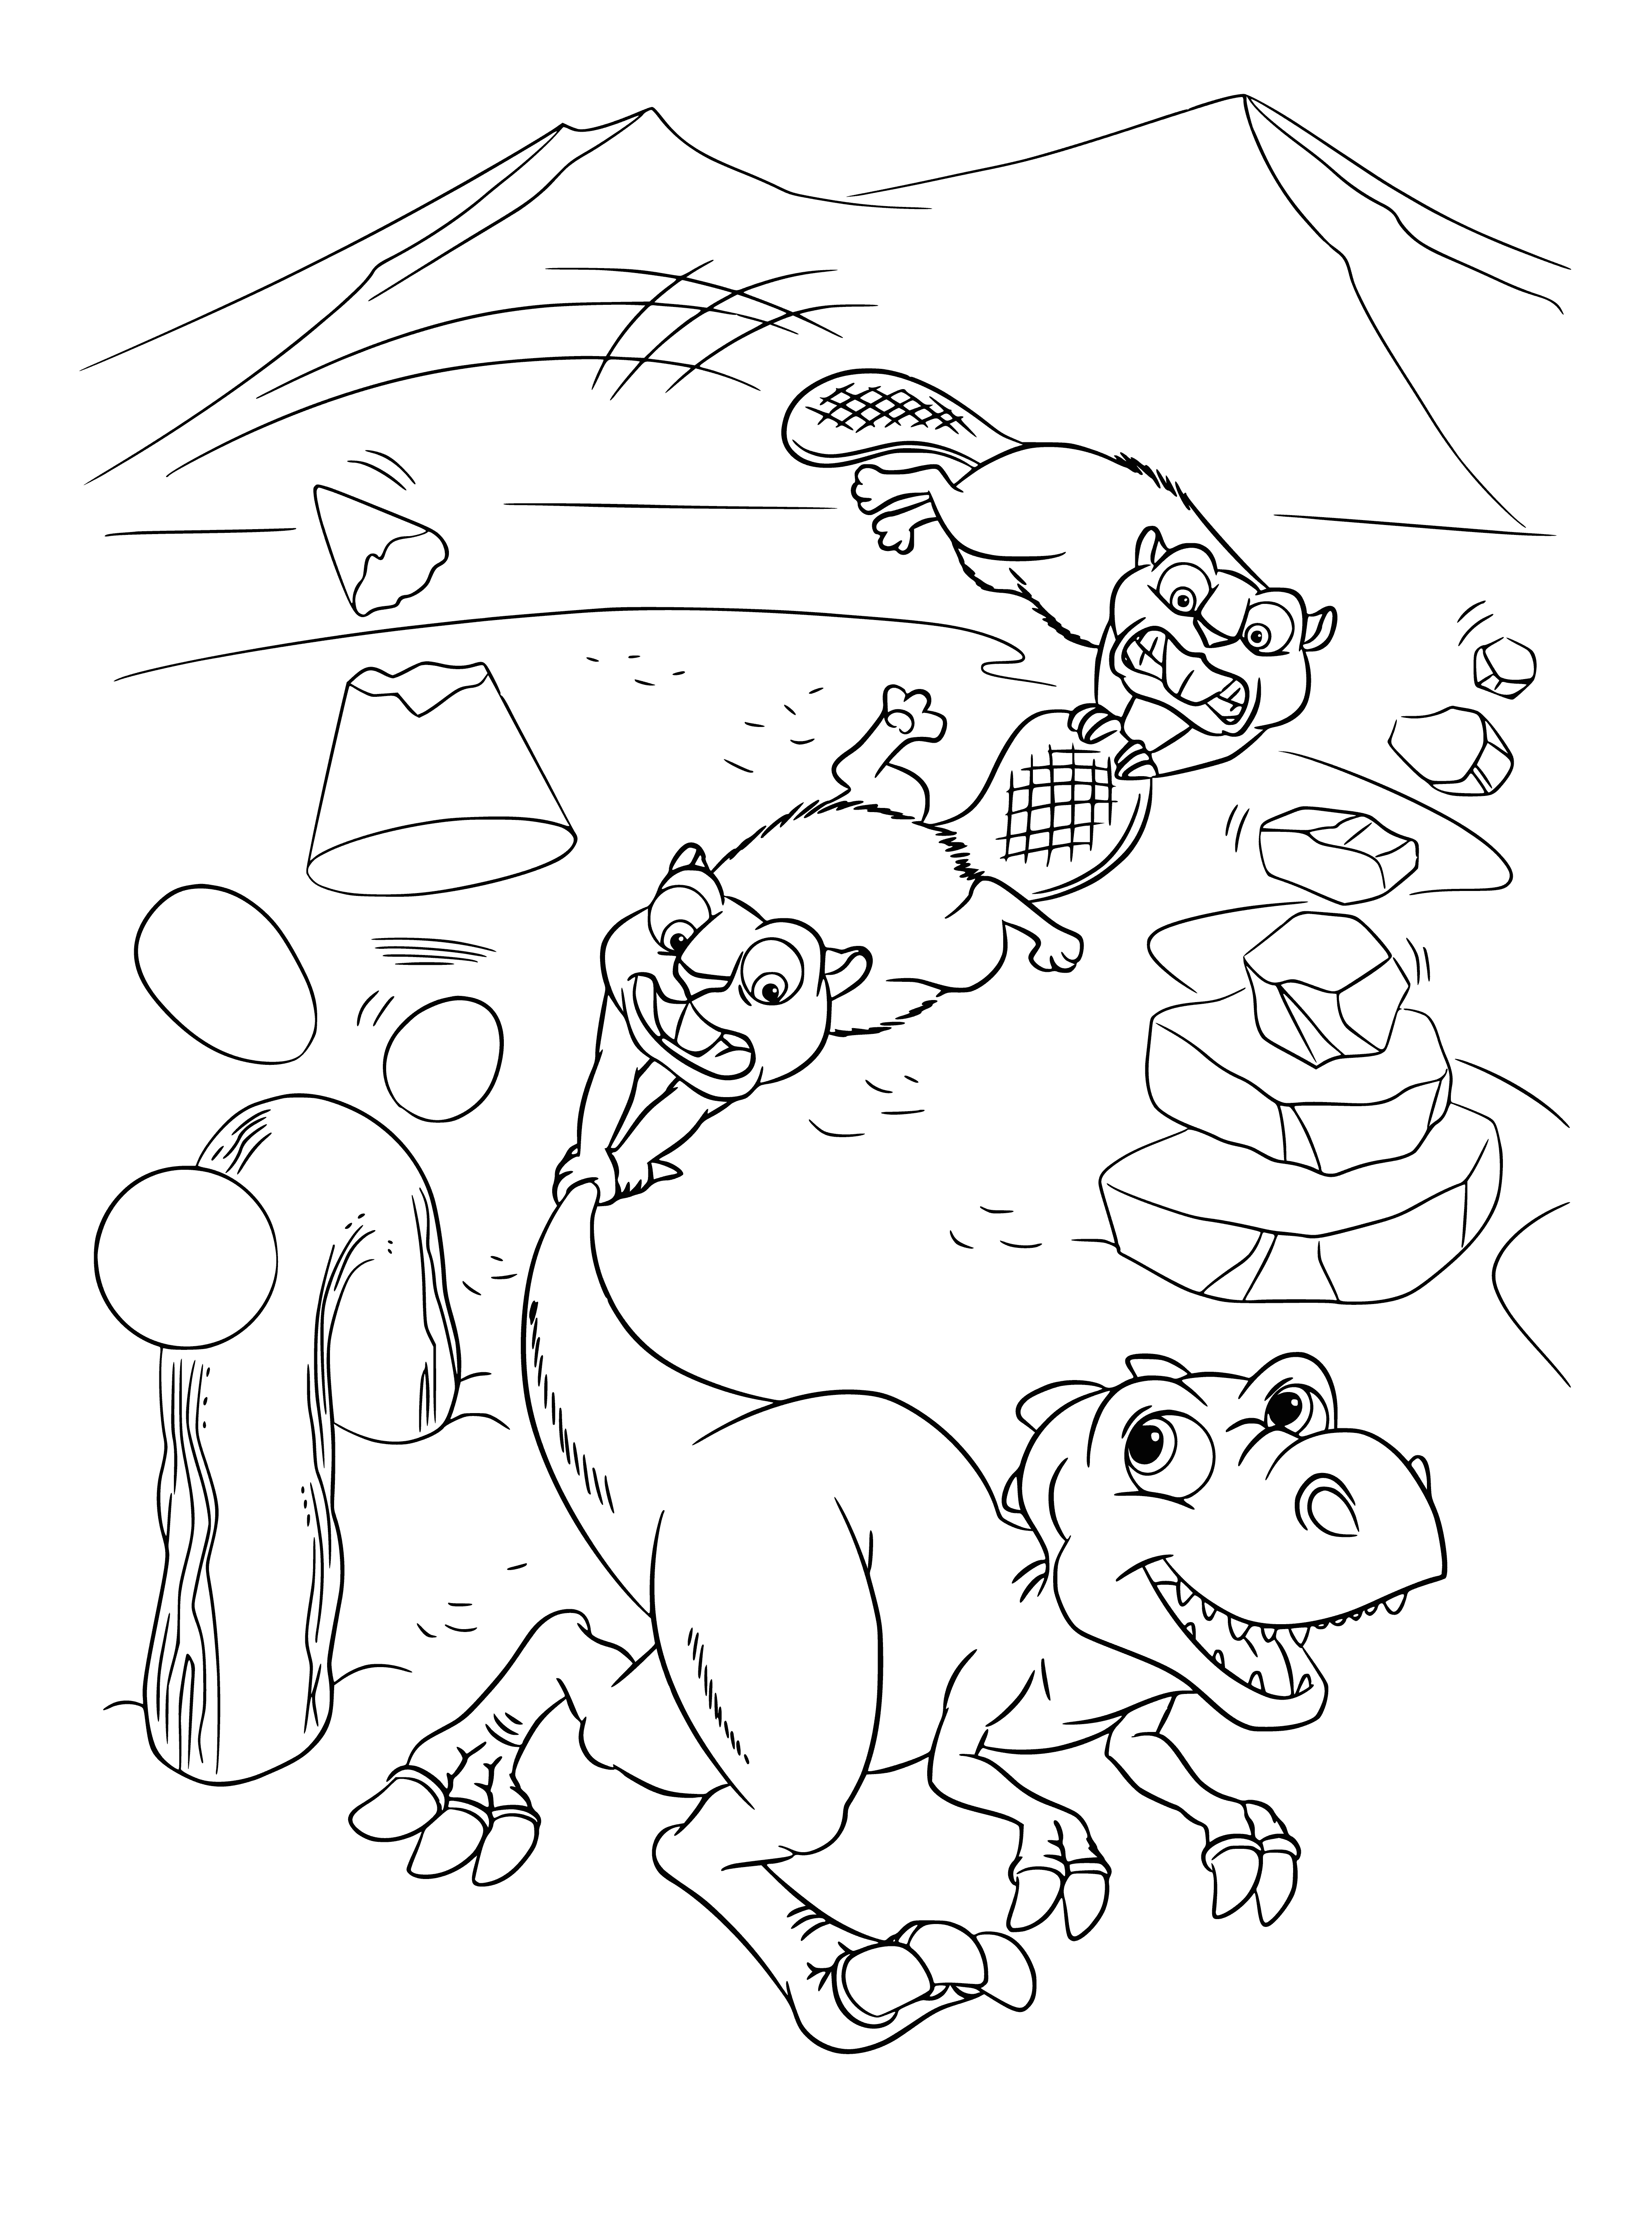 Beaver and dinosaur coloring page